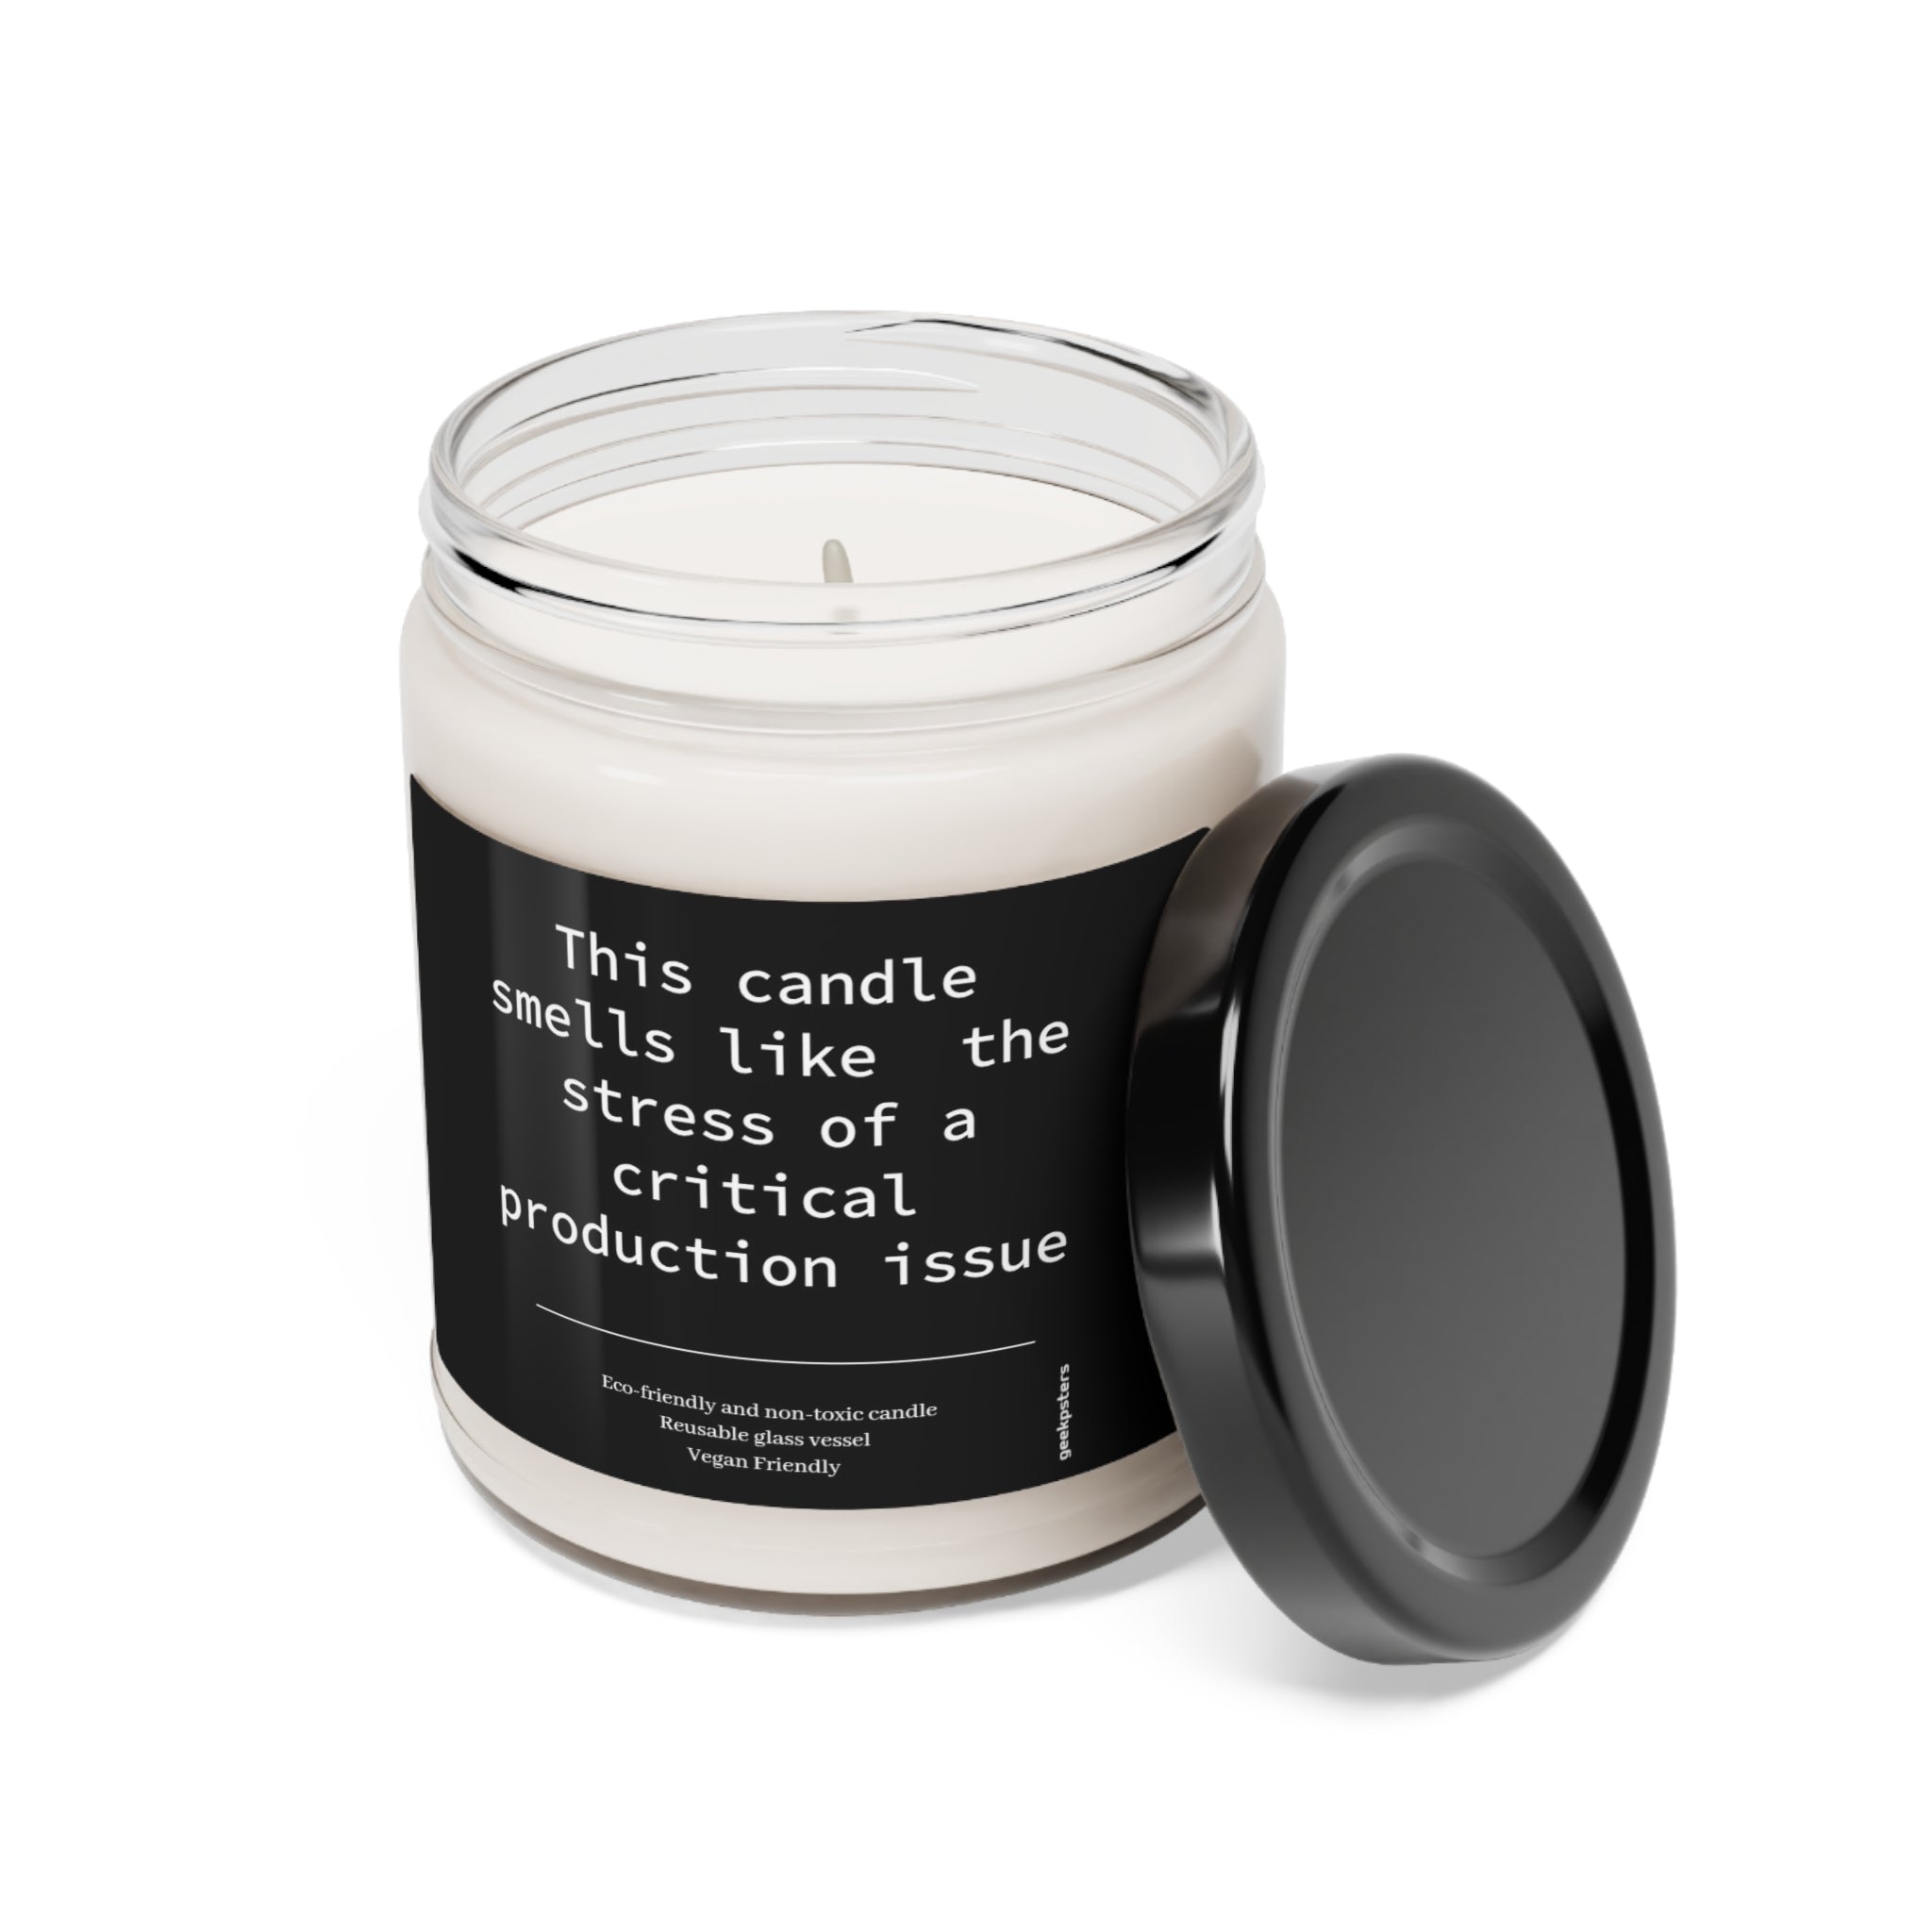 A "This Candle Smells Like the Stress of a Critical Production Issue - Scented Soy Candle, 9oz" in a clear jar with a black lid, labeled "this candle smells like the stress of a critical production issue," against a white background.